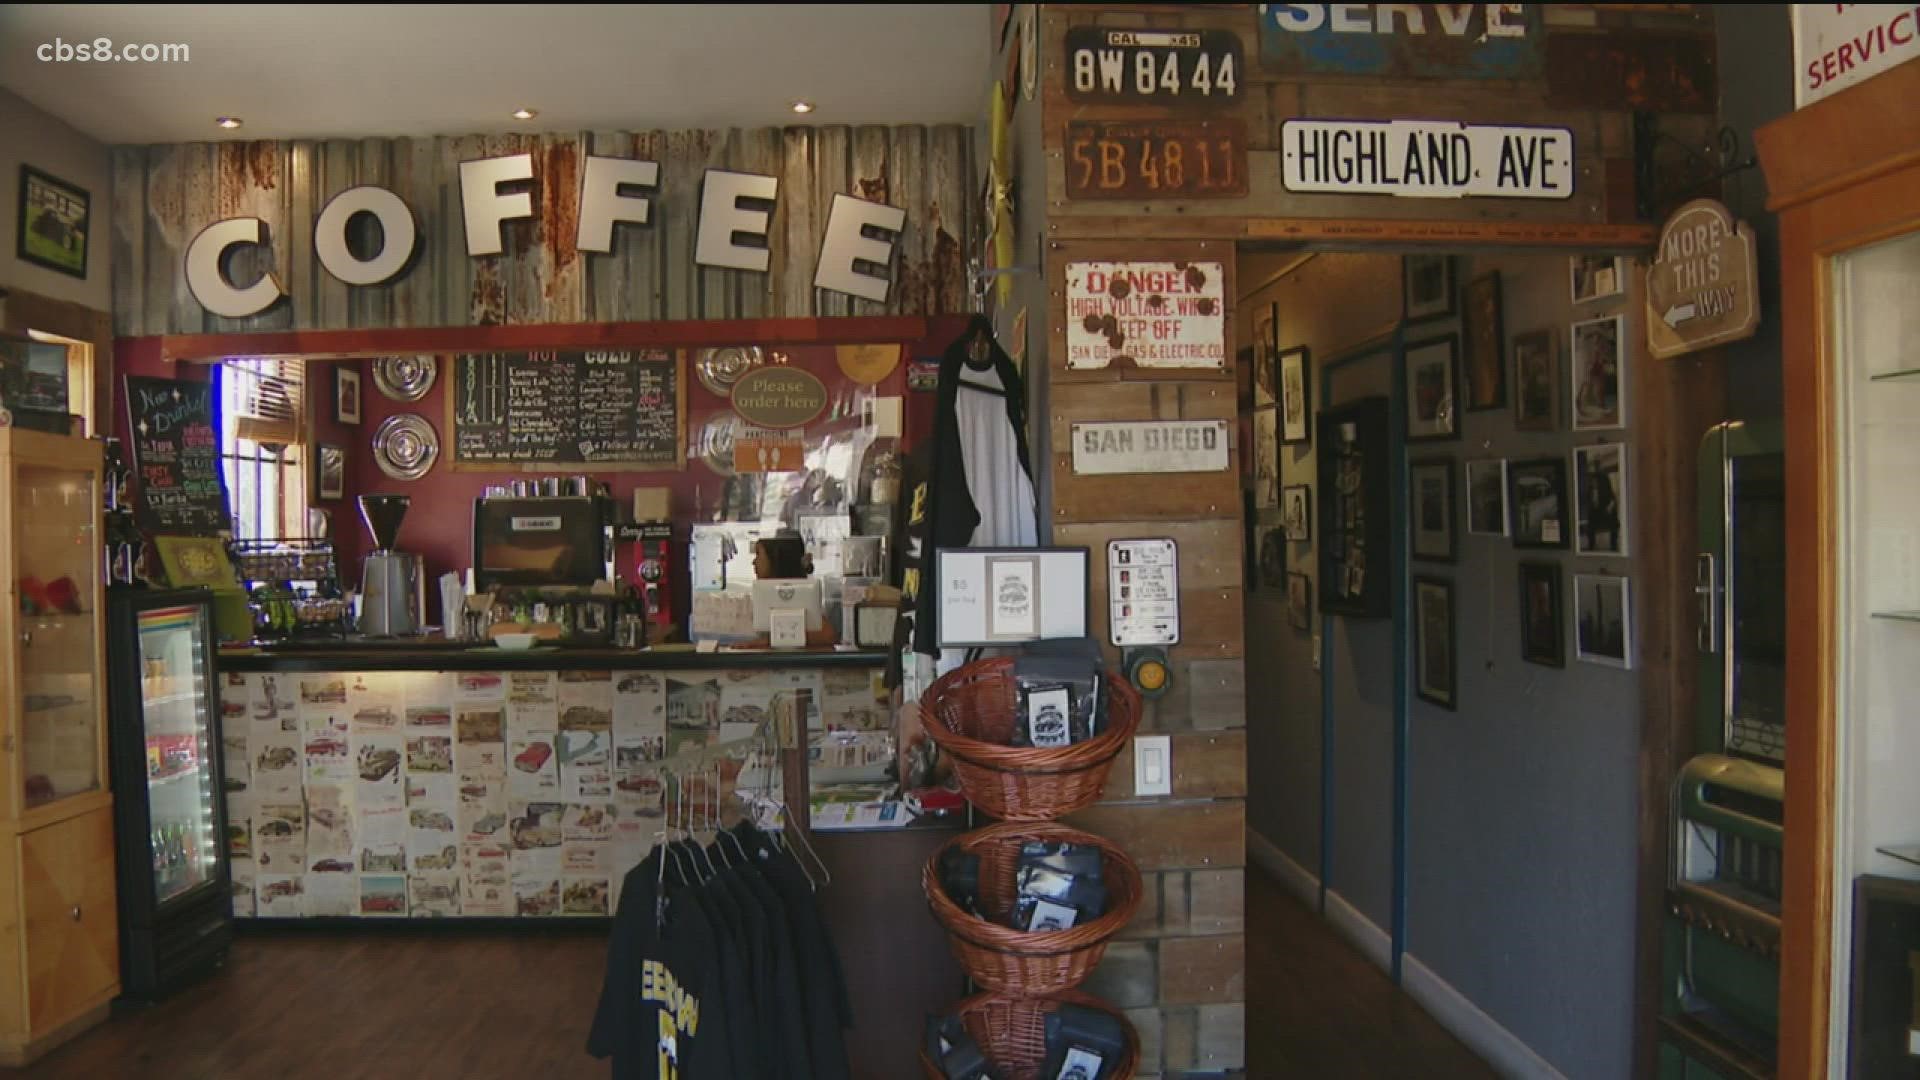 This coffee shop in National City celebrates low-rider culture and even sells classic car accessories and vintage items.